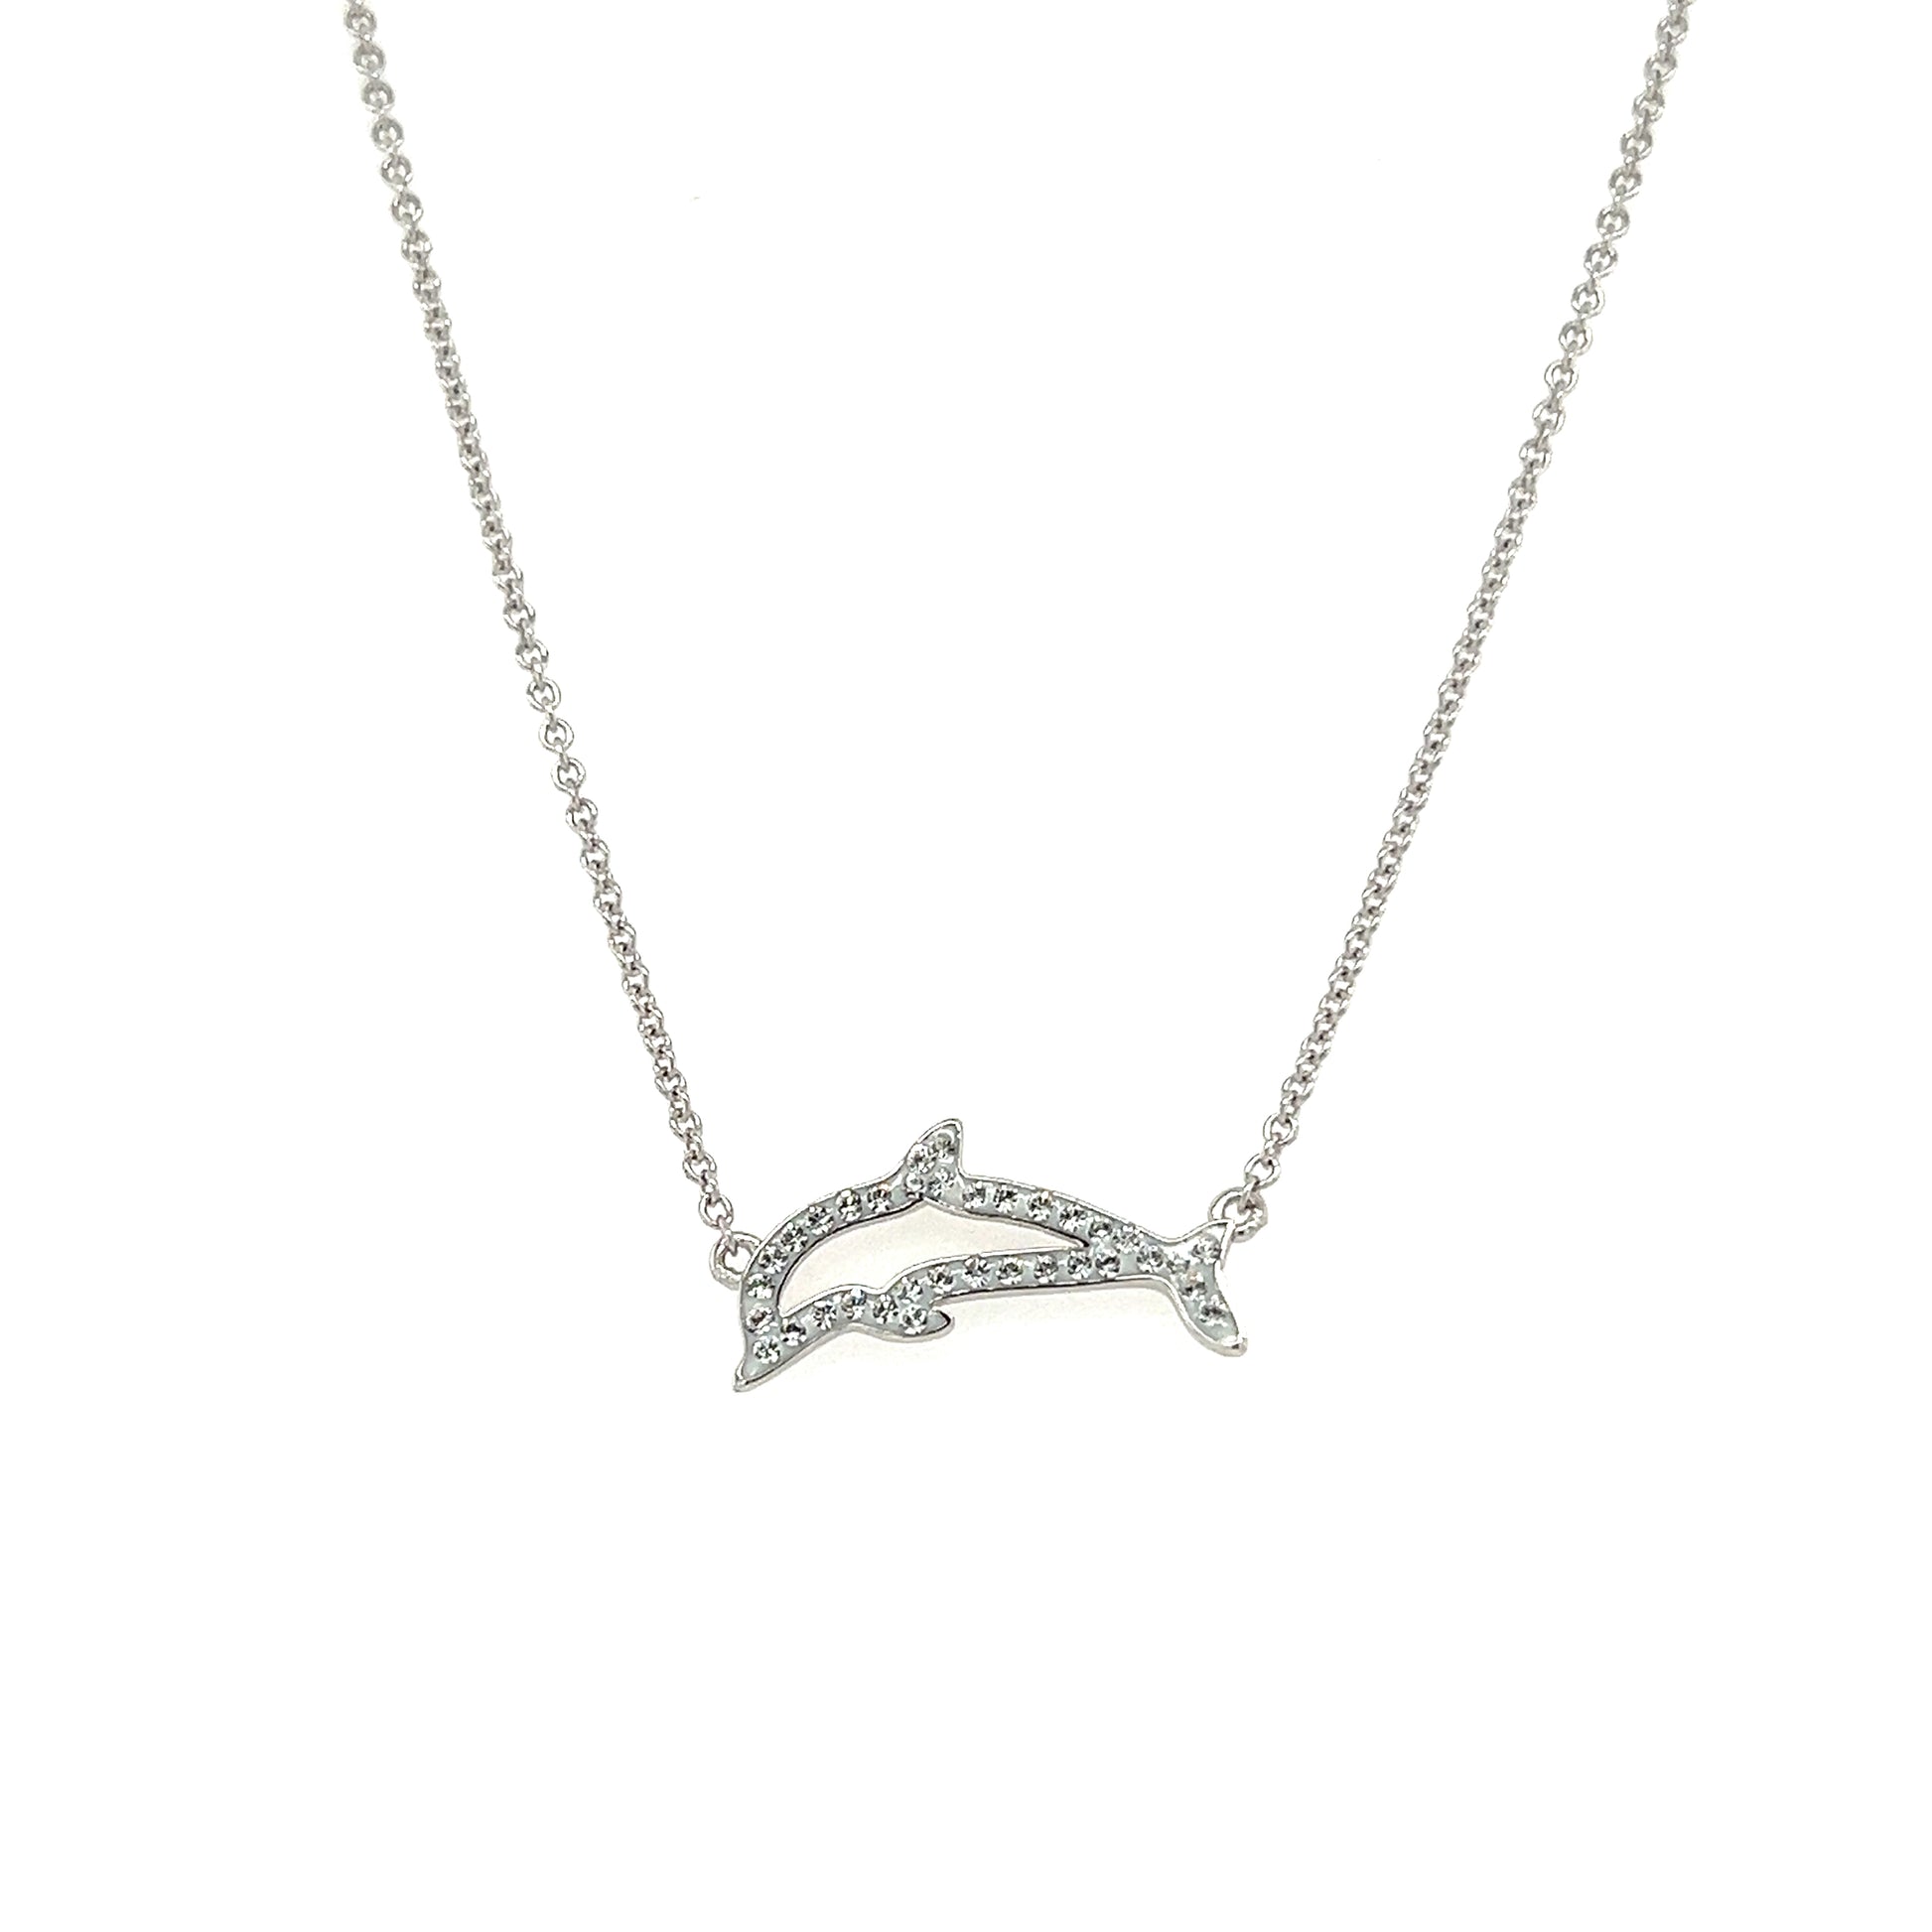 Dolphin Necklace with White Crystals in Sterling Silver Front View